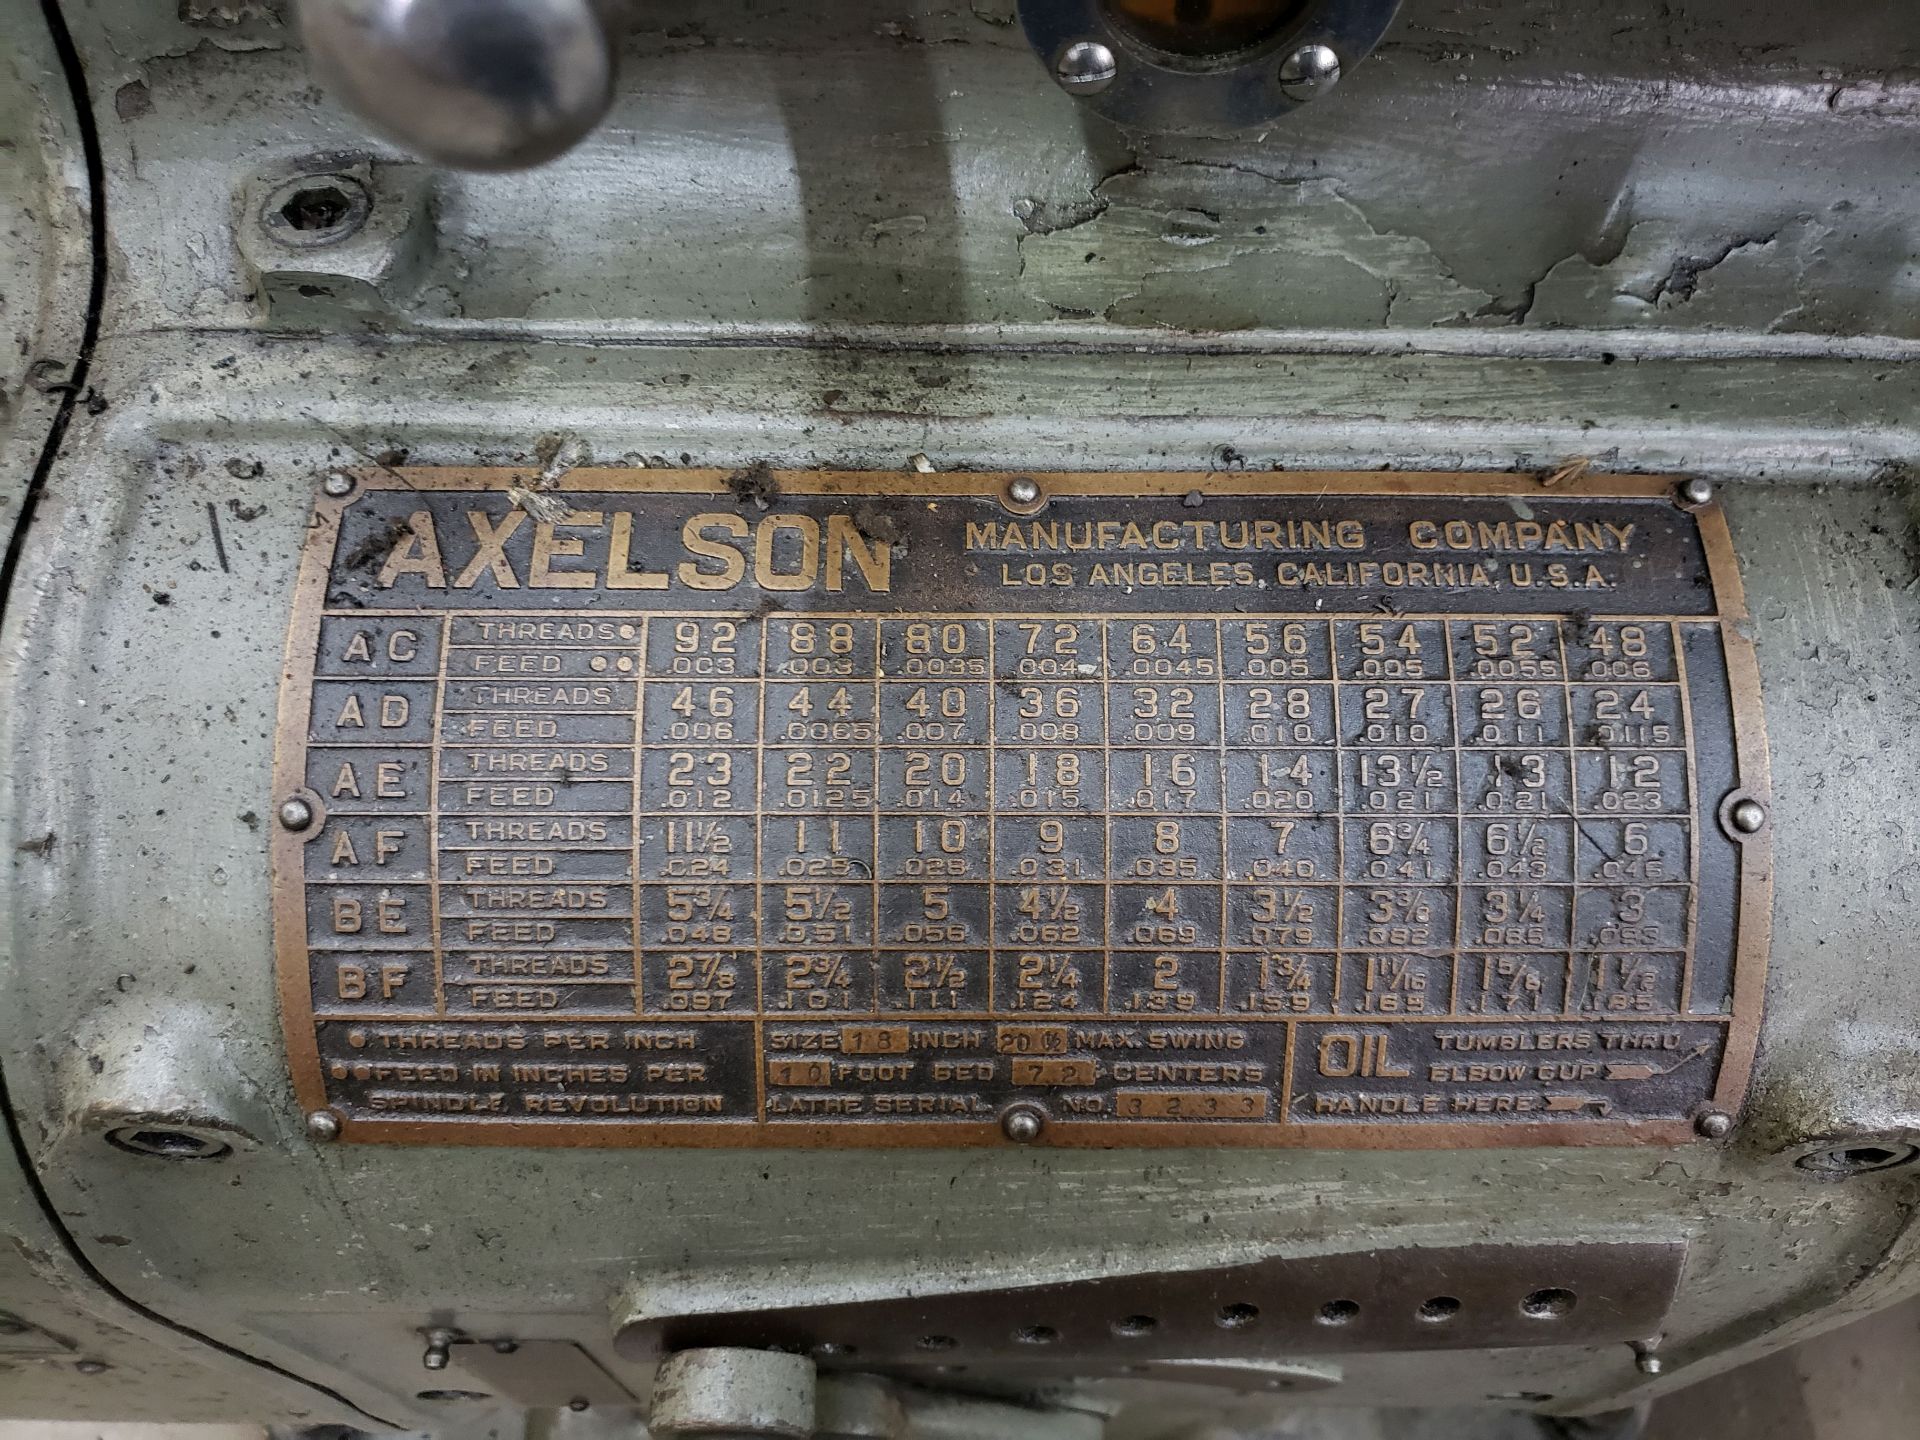 AXELSON 18"x69" LATHE 20.5" SWING, 10' BED LENGTH, 72" CENTERS, 8-808 RPM SPINDLE SPEED, SN 3233, - Image 4 of 10